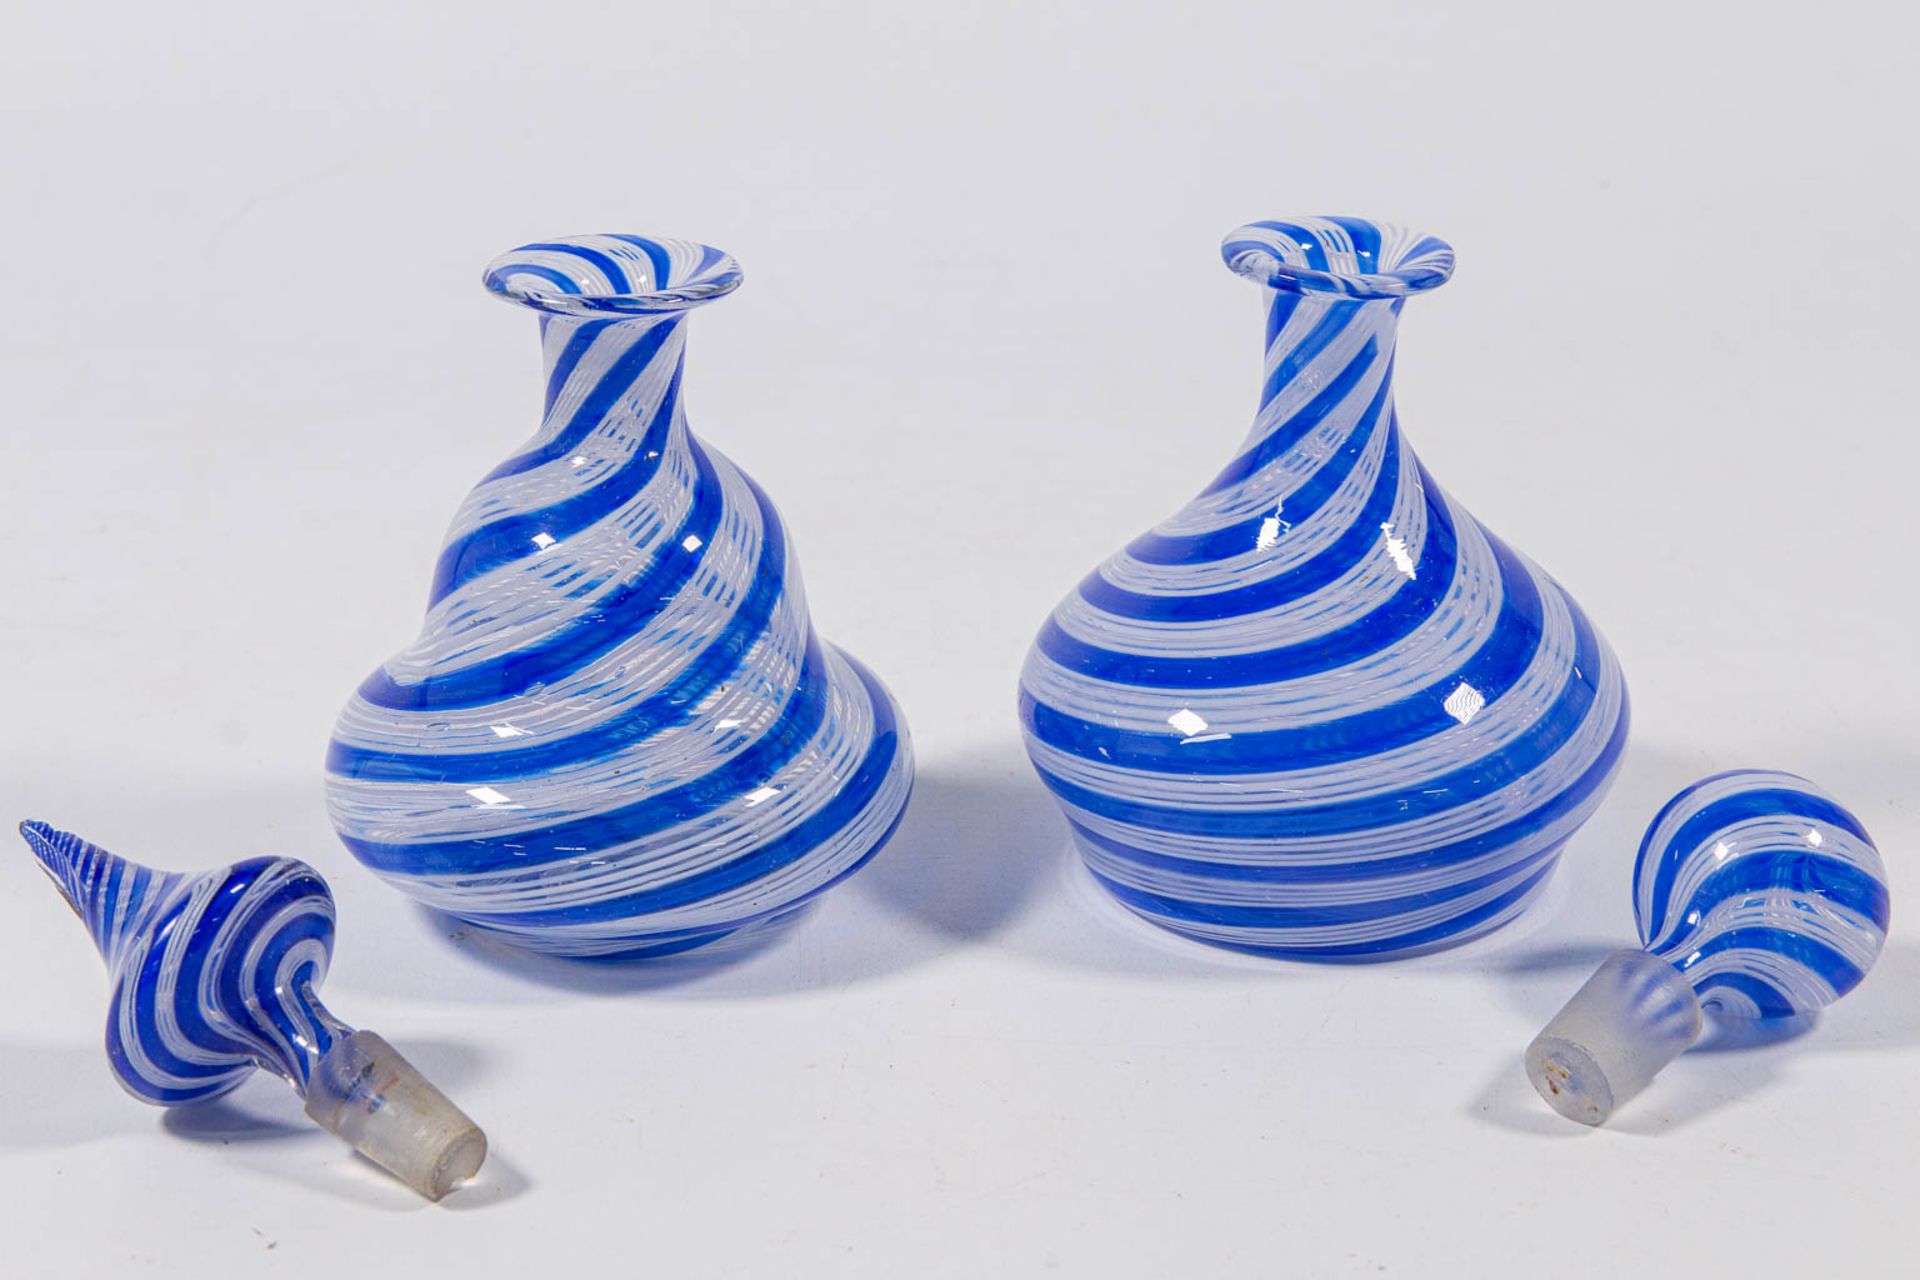 A pair of decanters with stopper, made in Murano, Italy around 1950. (15 x 9 cm) - Image 9 of 17